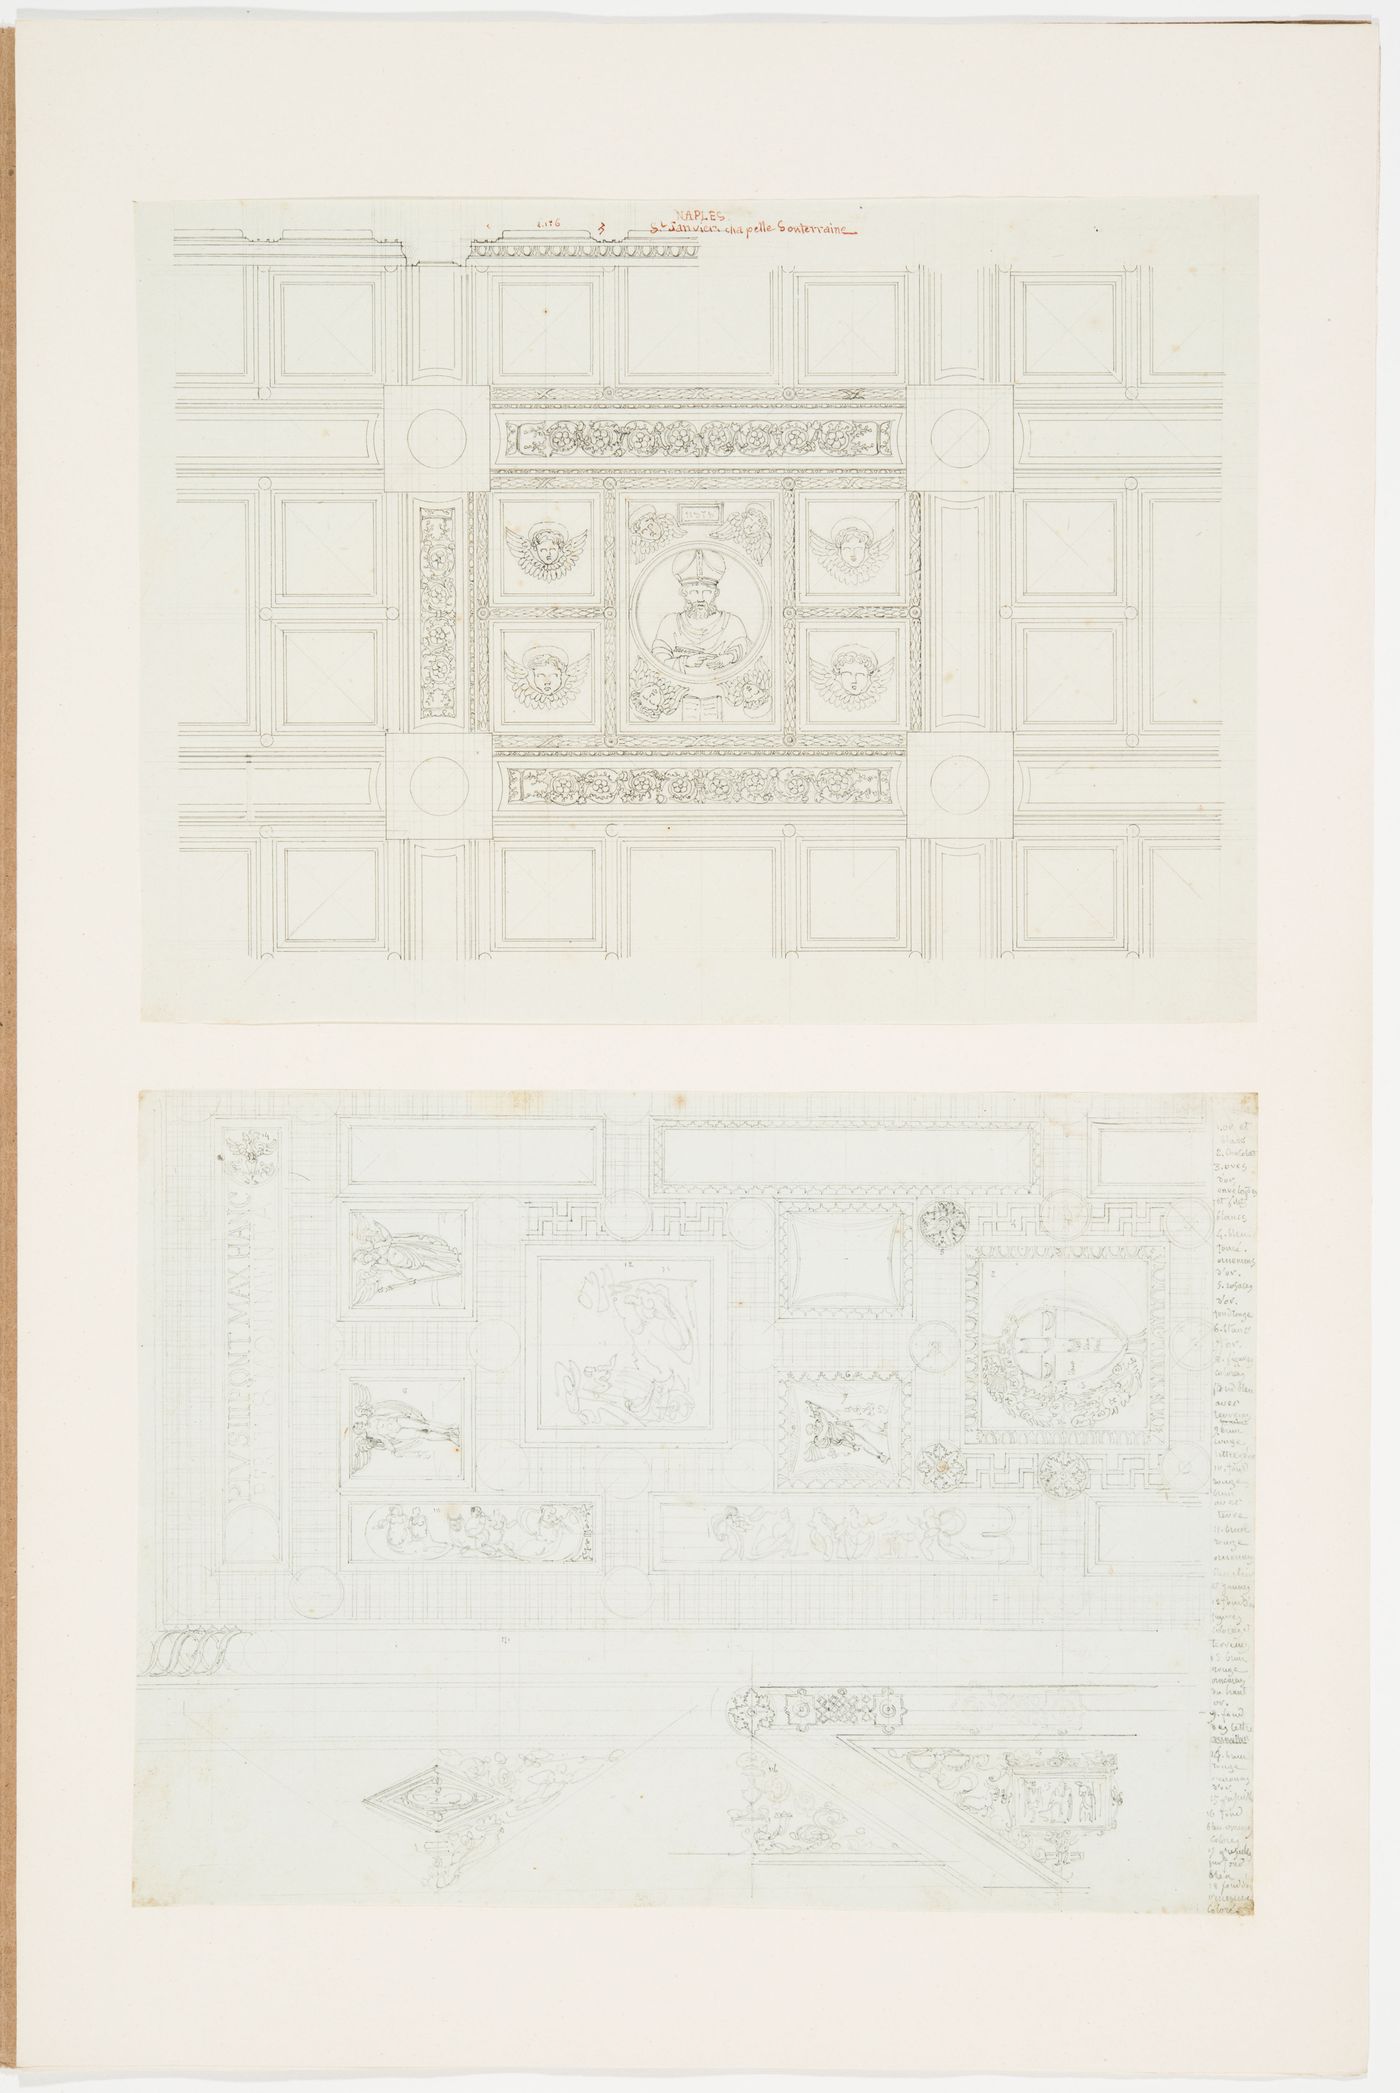 Partial reflected ceiling plans showing coffers and decoration from Cappella del Soccorso, Cathedral of San Gennaro, Naples